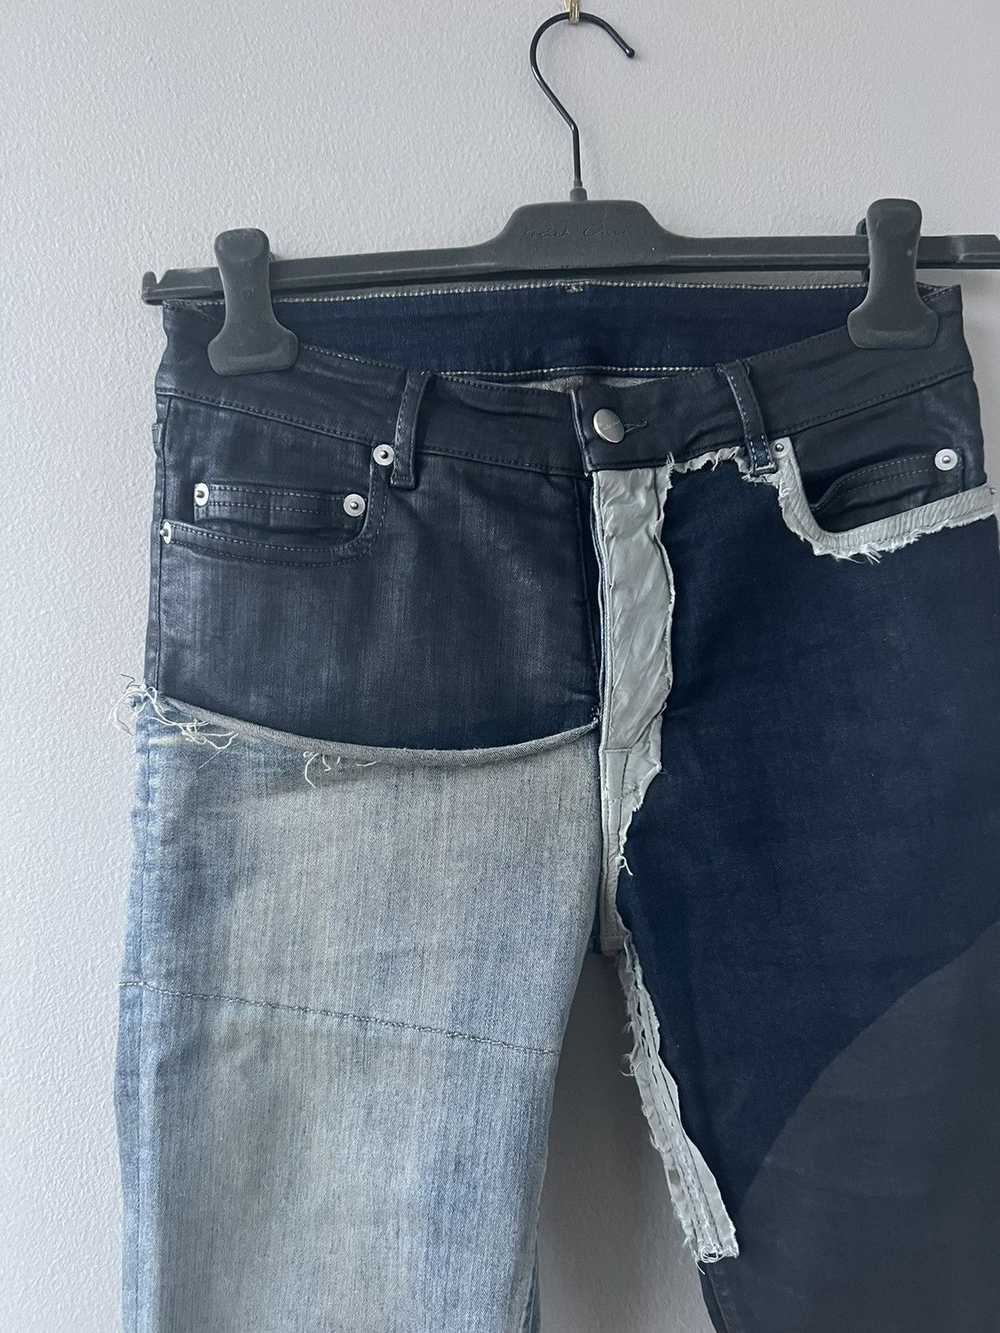 Rick Owens SS19 BABEL Combo Tyrone Jeans - image 2